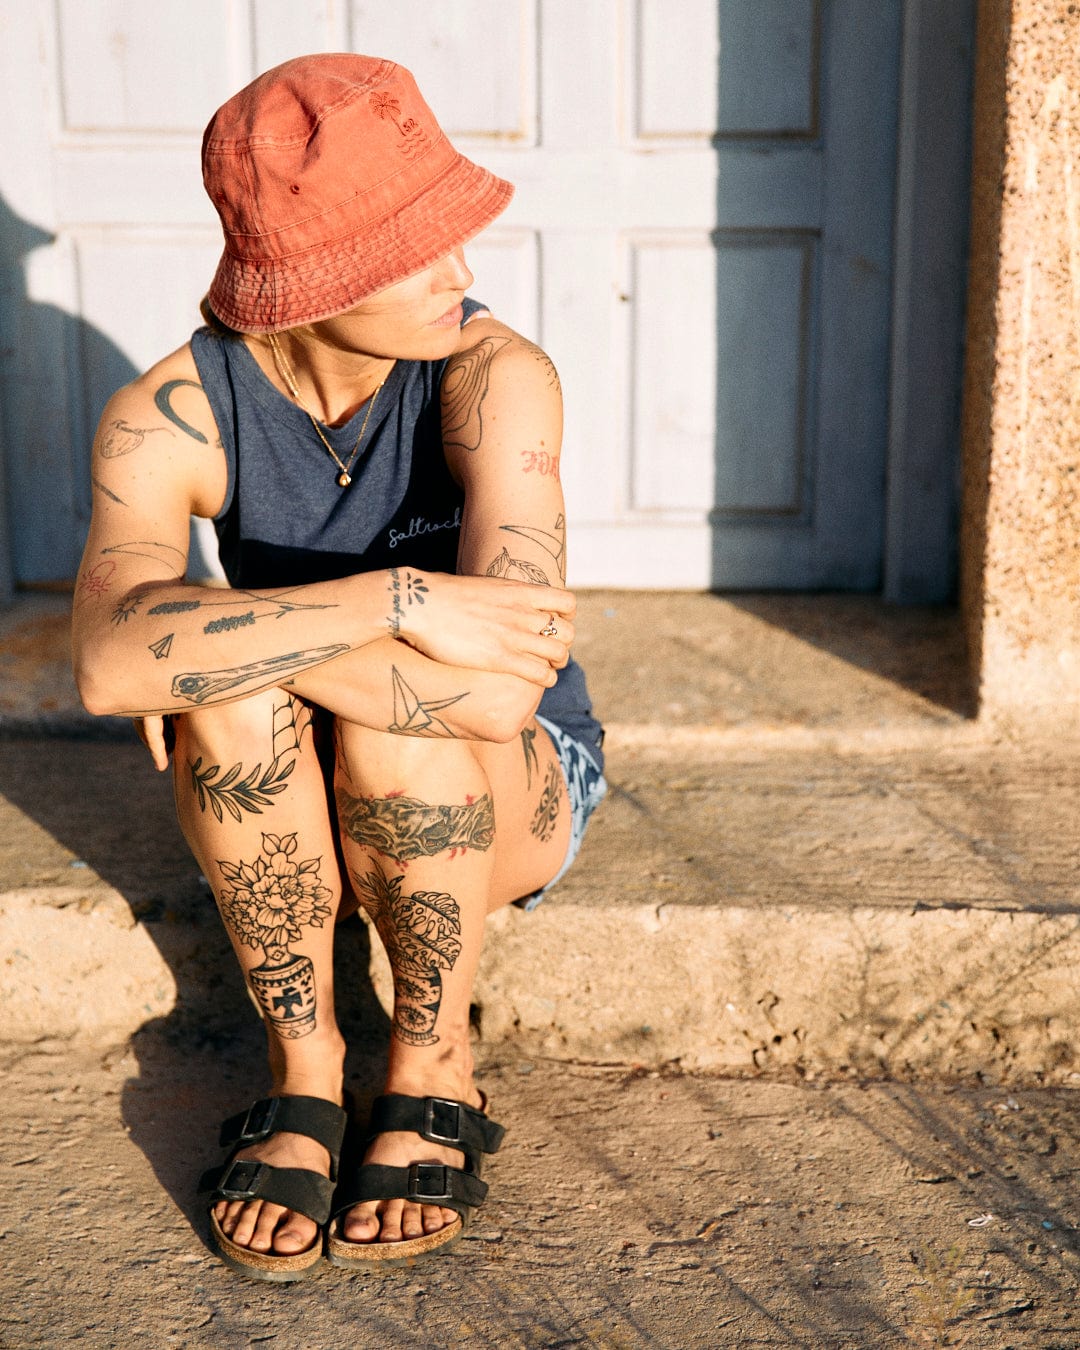 A person with tattoos sits by a wooden door, wearing a red bucket hat and Saltrock machine washable sandals, bathed in sunlight.